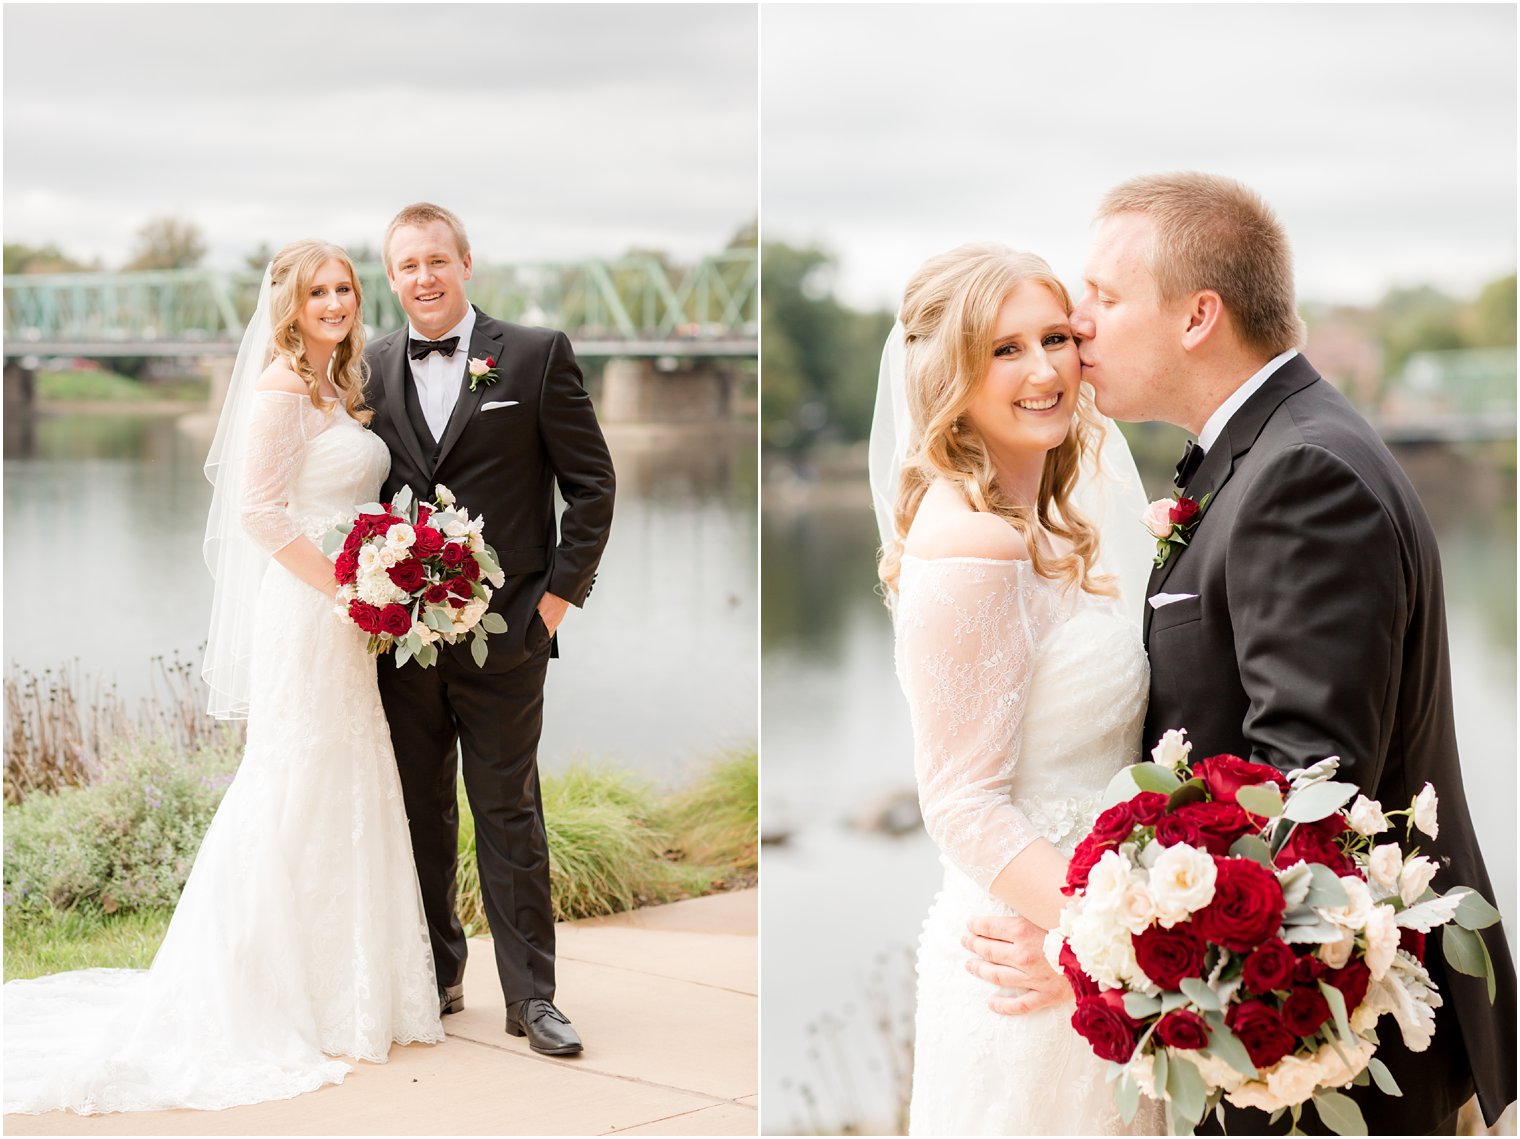 Classic fall wedding with red flowers and black tuxedo